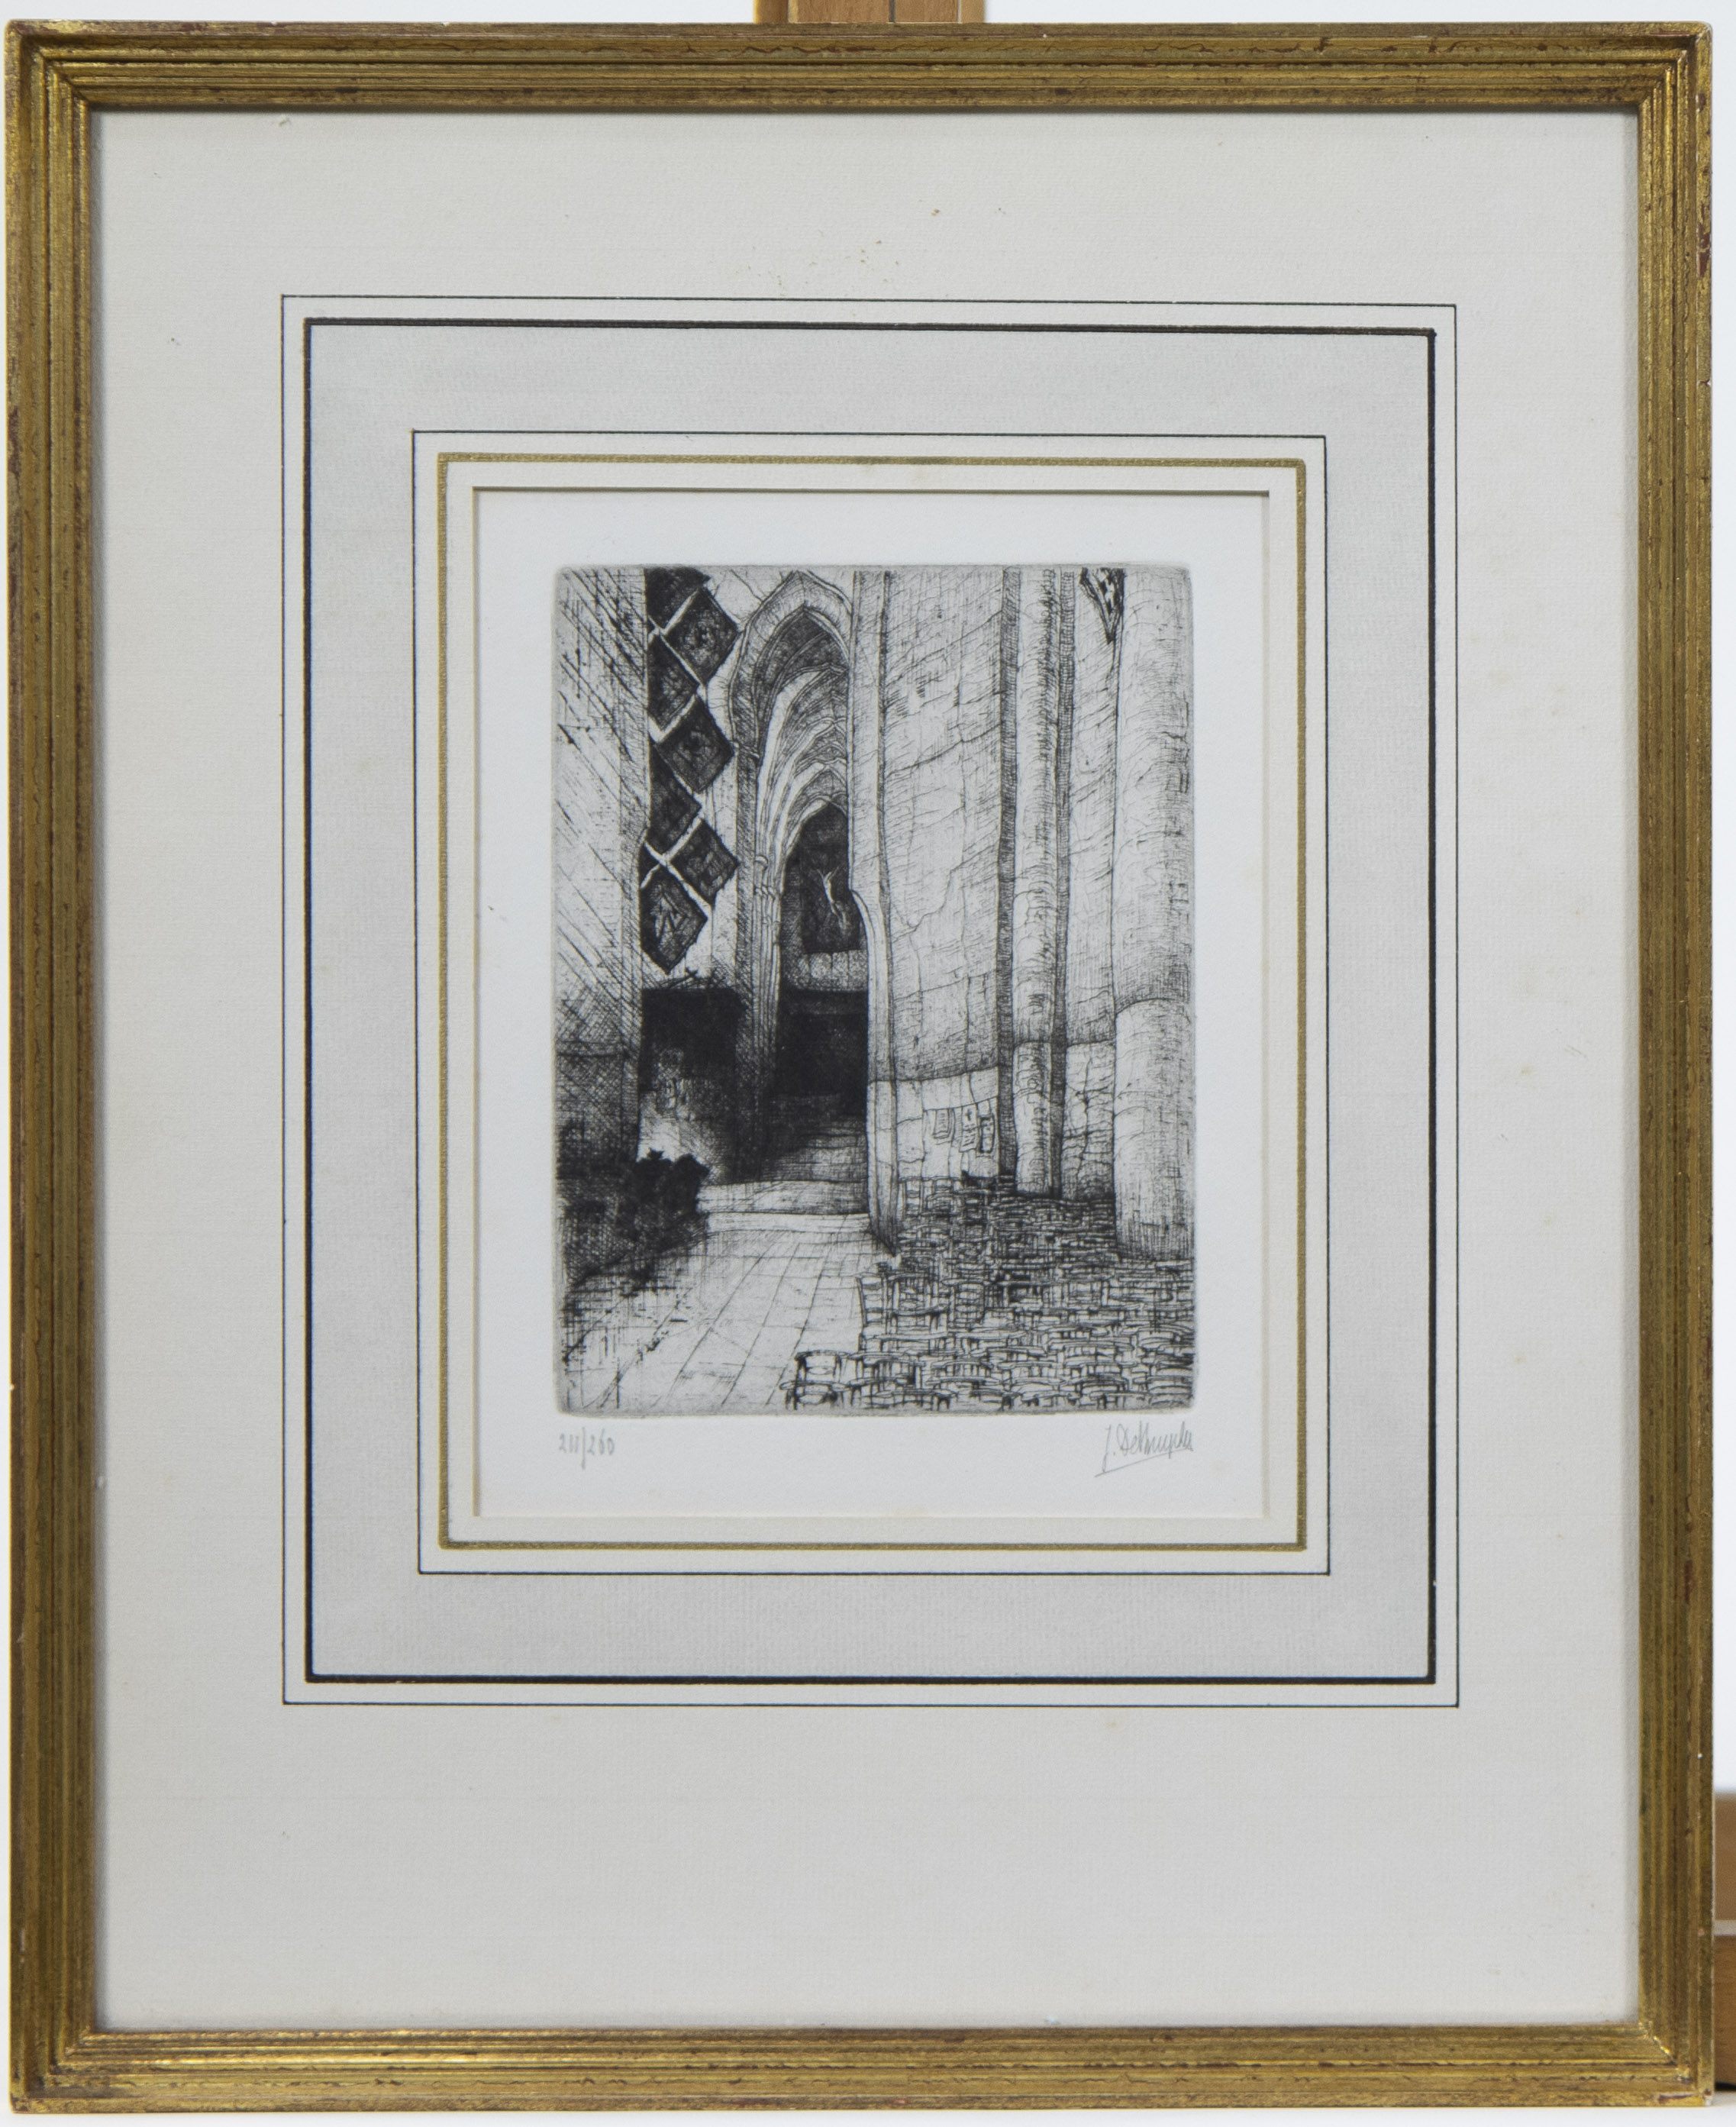 Jules DE BRUYCKER (1870-1945), etching St Nicholas church Ghent, numbered 211/260 and signed - Image 2 of 4